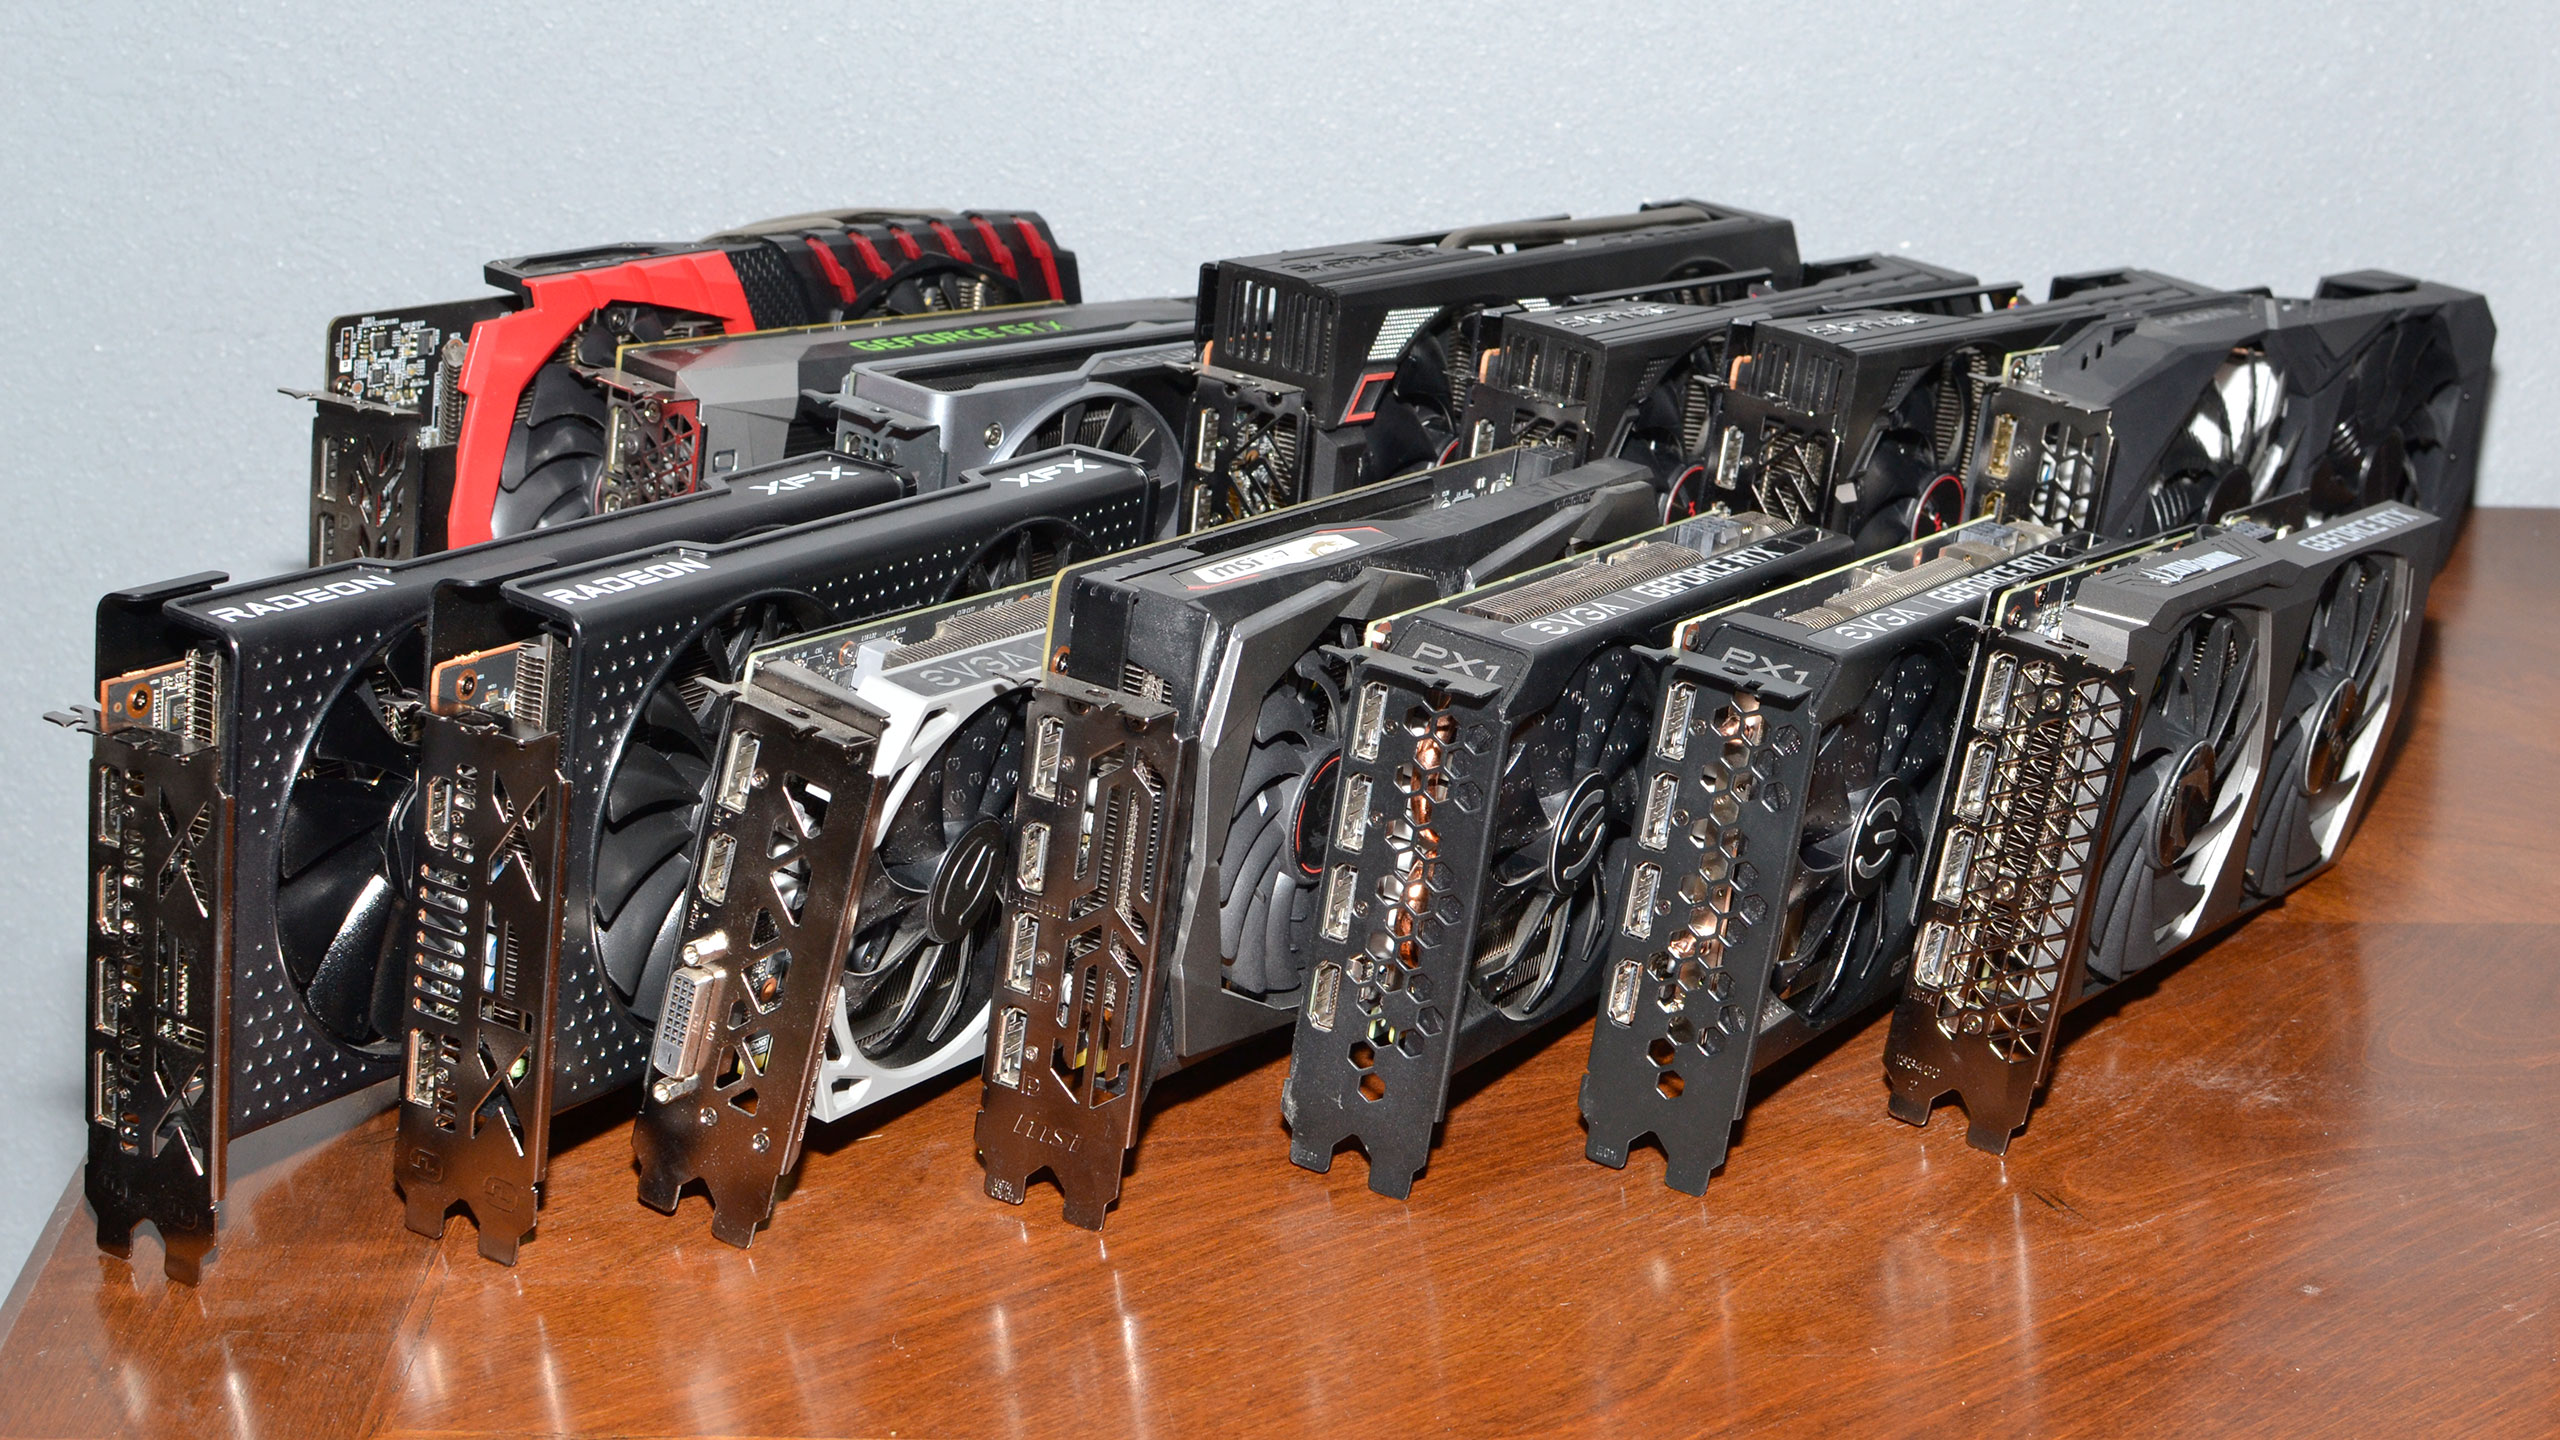 A bunch of new and old graphics cards